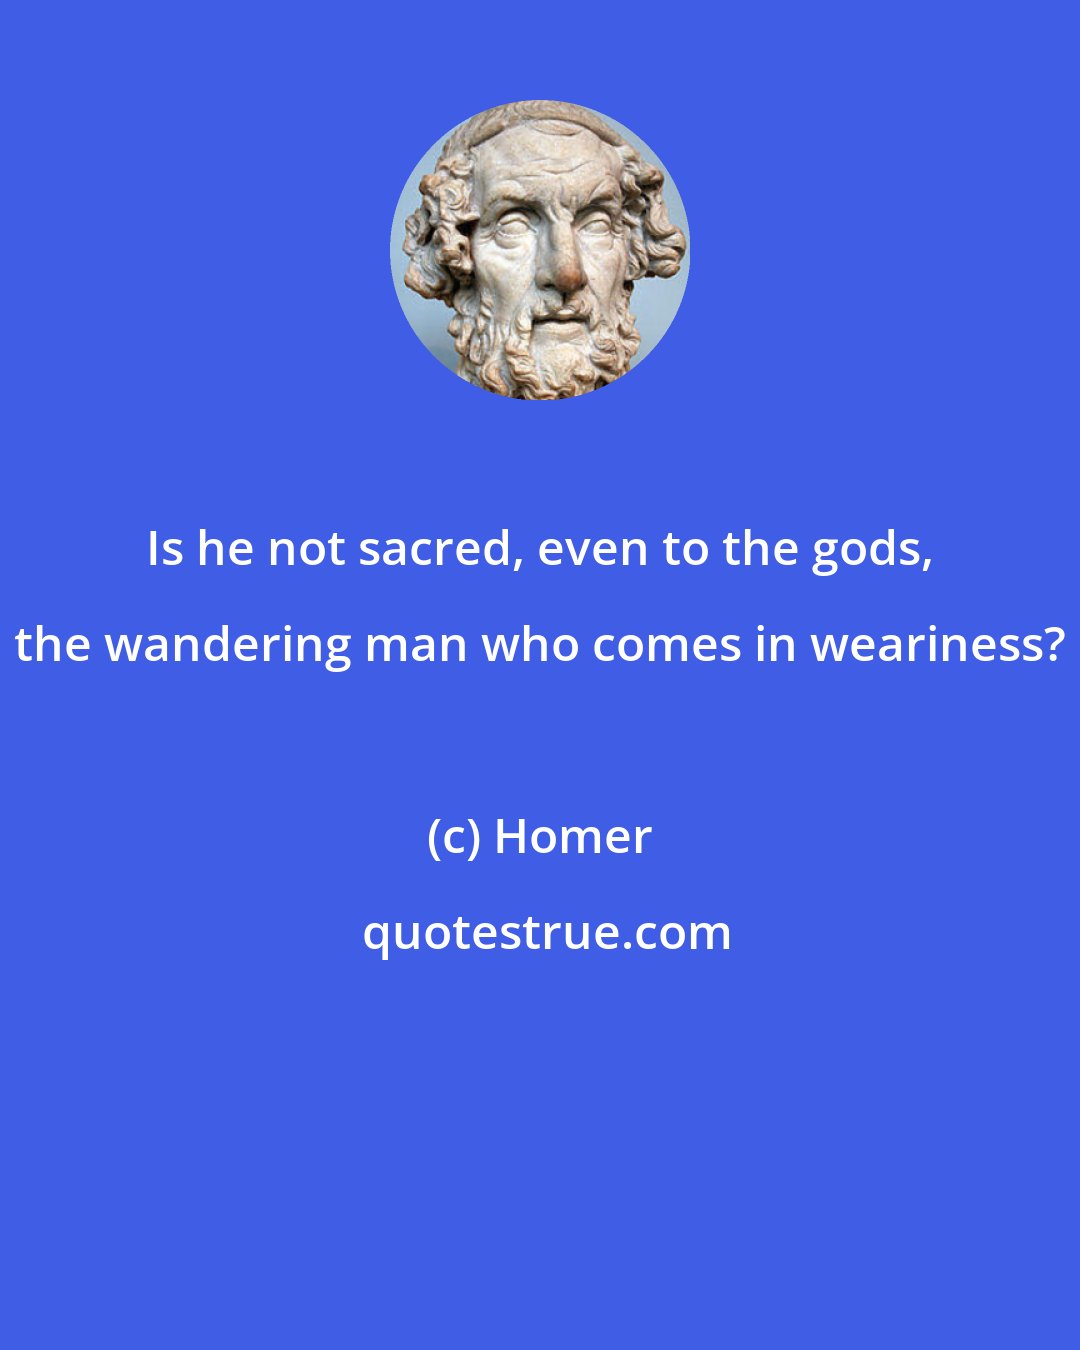 Homer: Is he not sacred, even to the gods, the wandering man who comes in weariness?